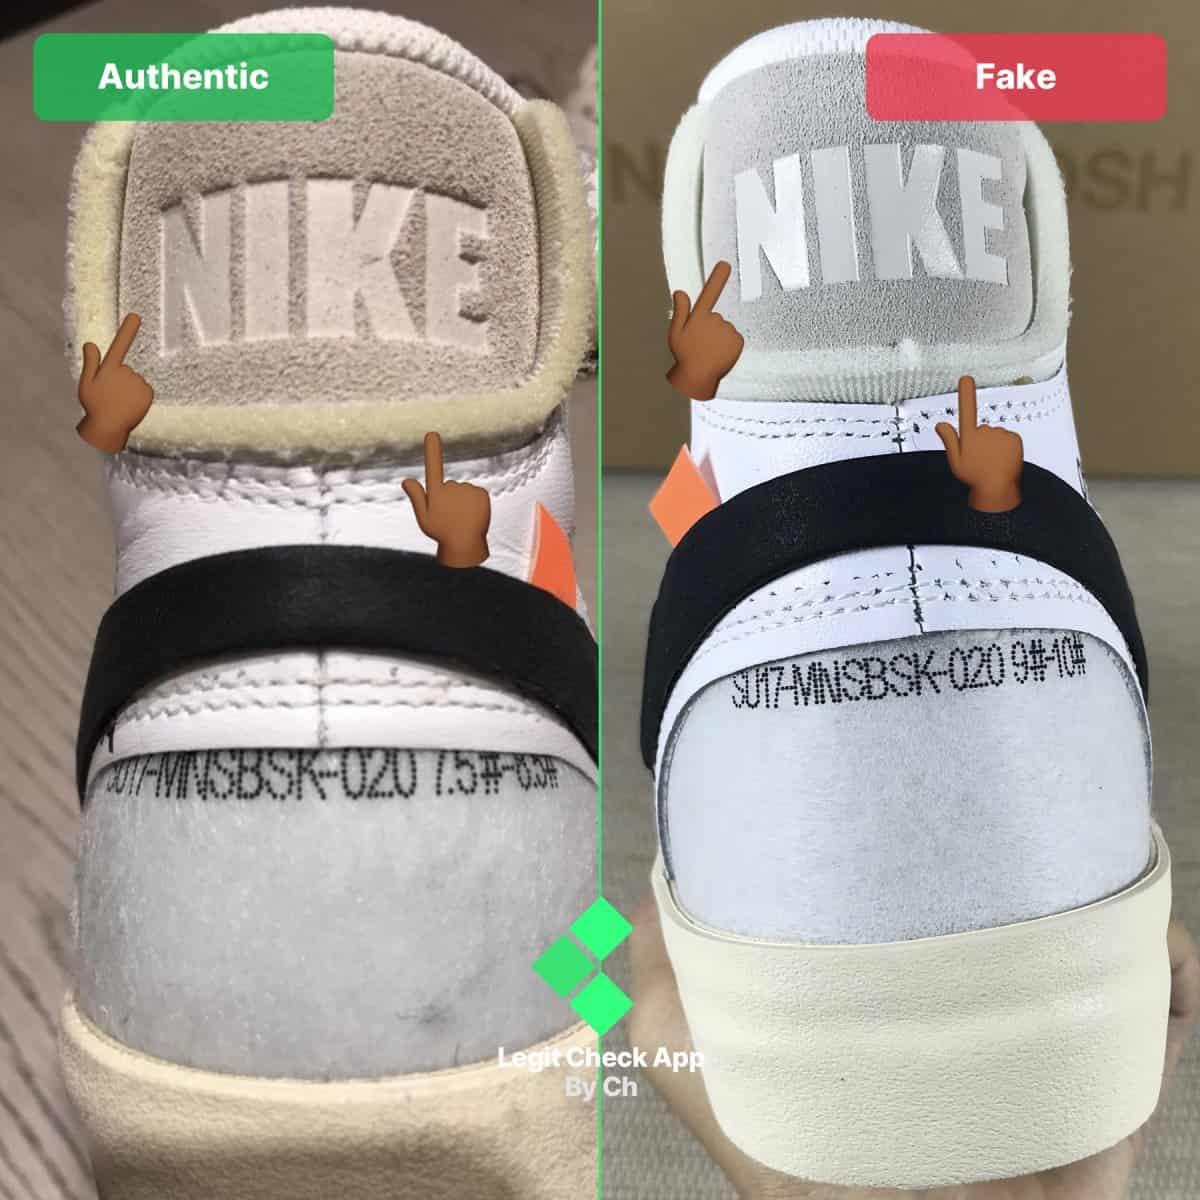 How To Spot Real Vs Fake Off-White Nike 